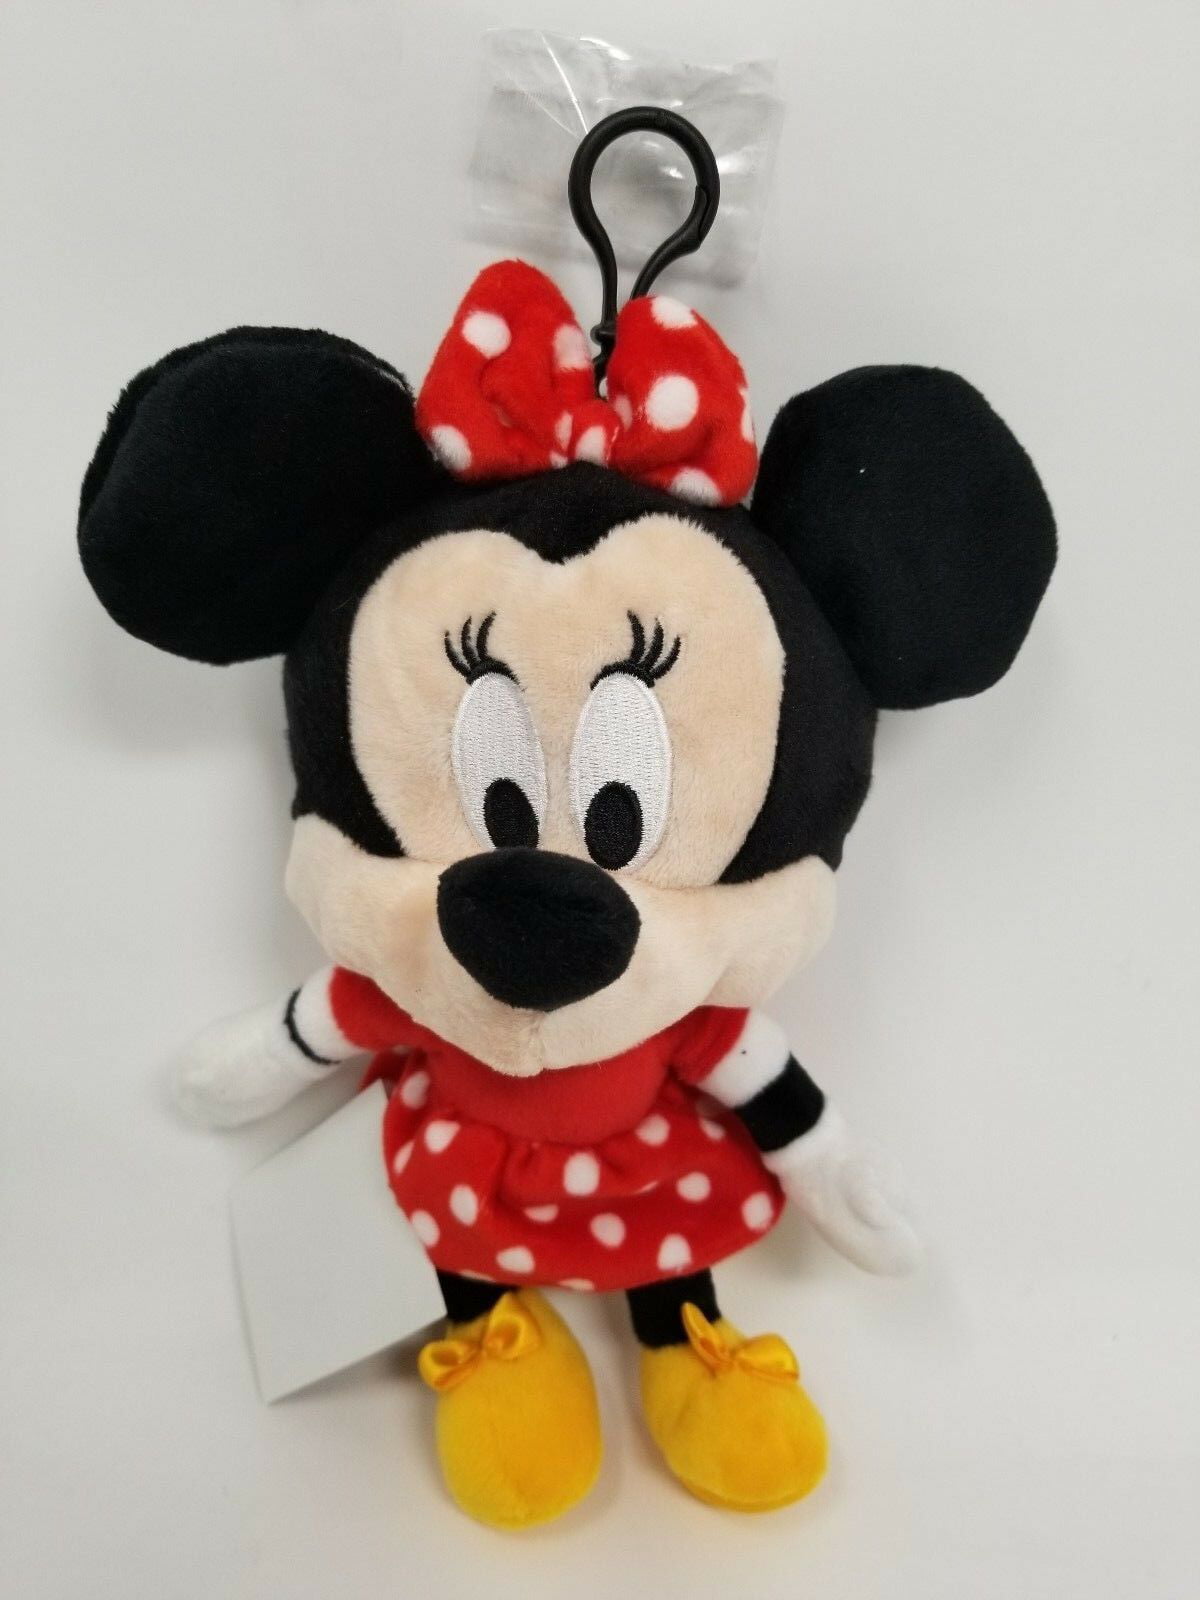 New Arrive Disney Minnie Mouse 8" Plush Keychain/Coin Purse-Red 